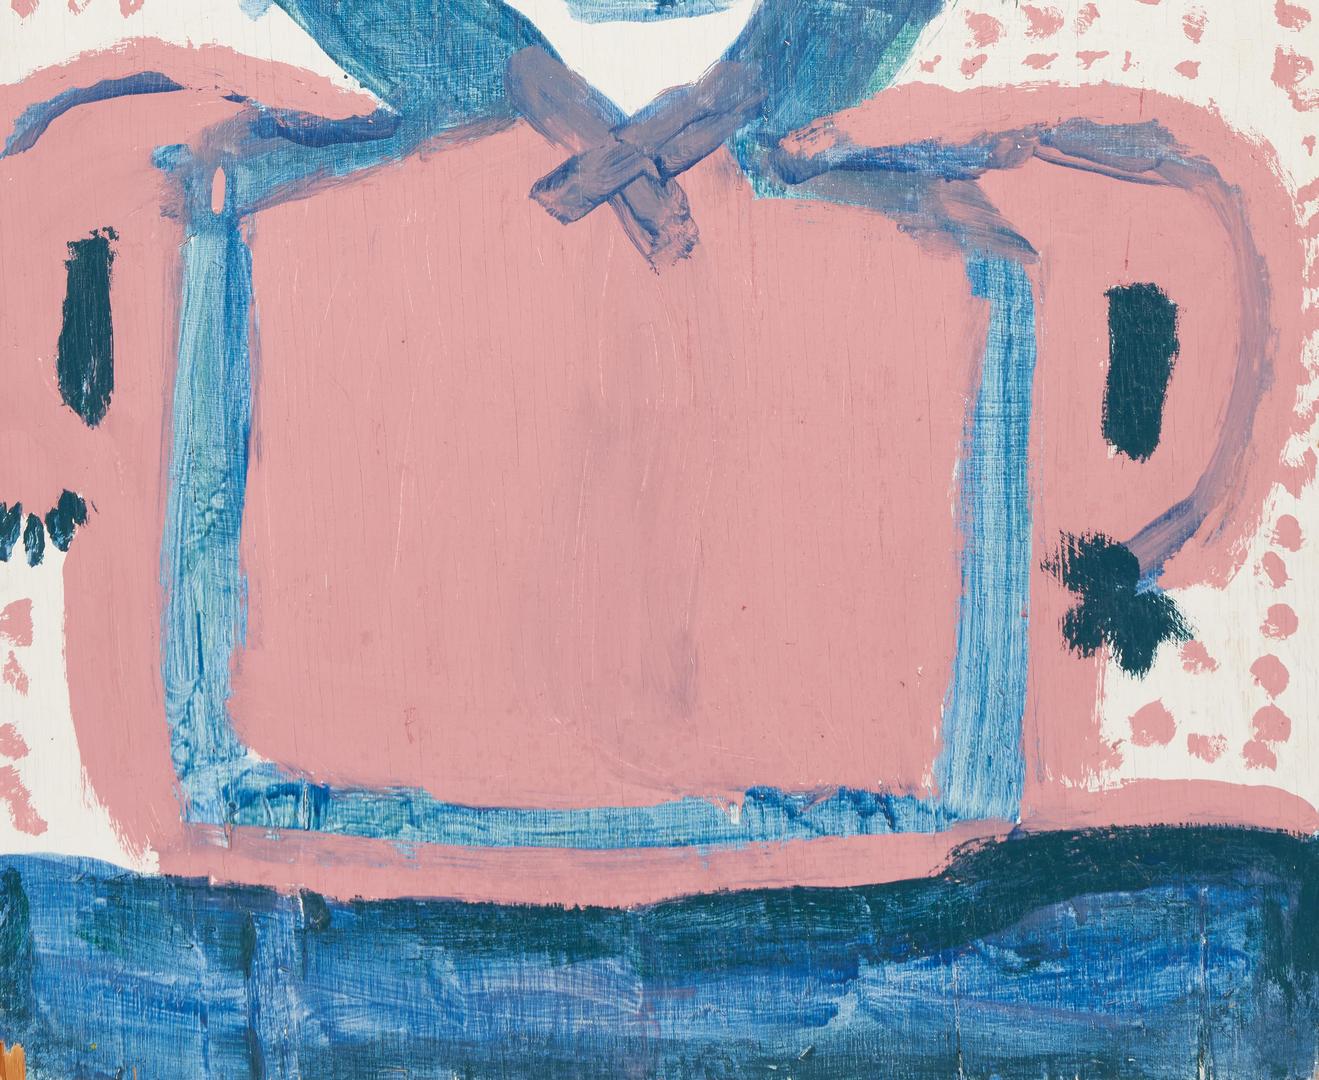 Lot 206: Mary Tillman Smith, Outsider Art Painting of a Figure in Pinks/Blues